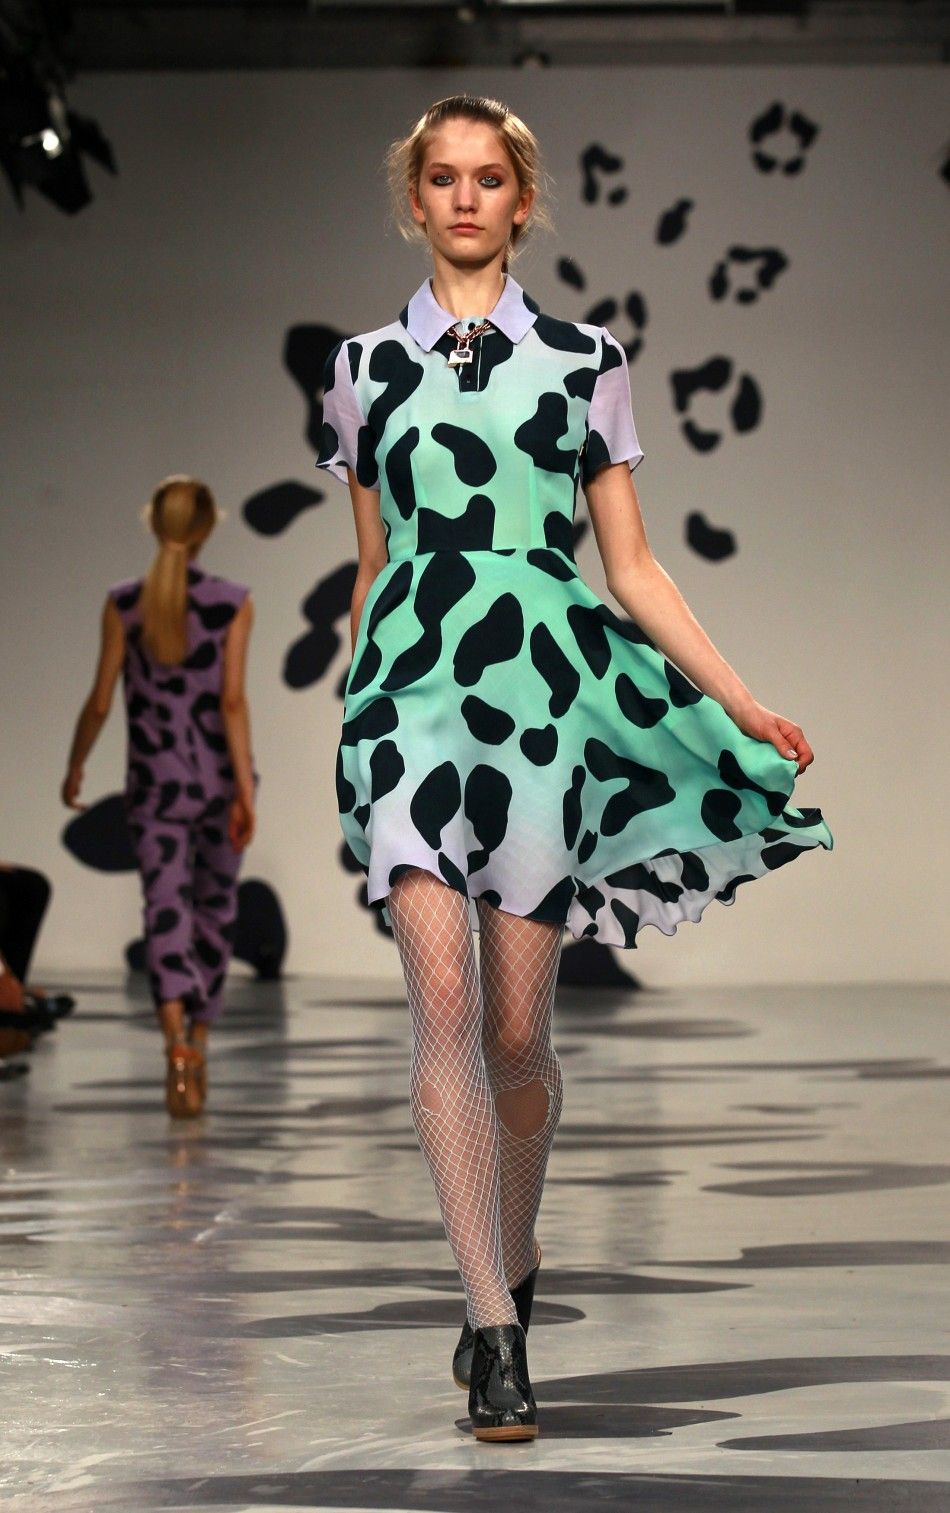 Models present creations at the House of Holland 2012 SpringSummer collection during London Fashion Week